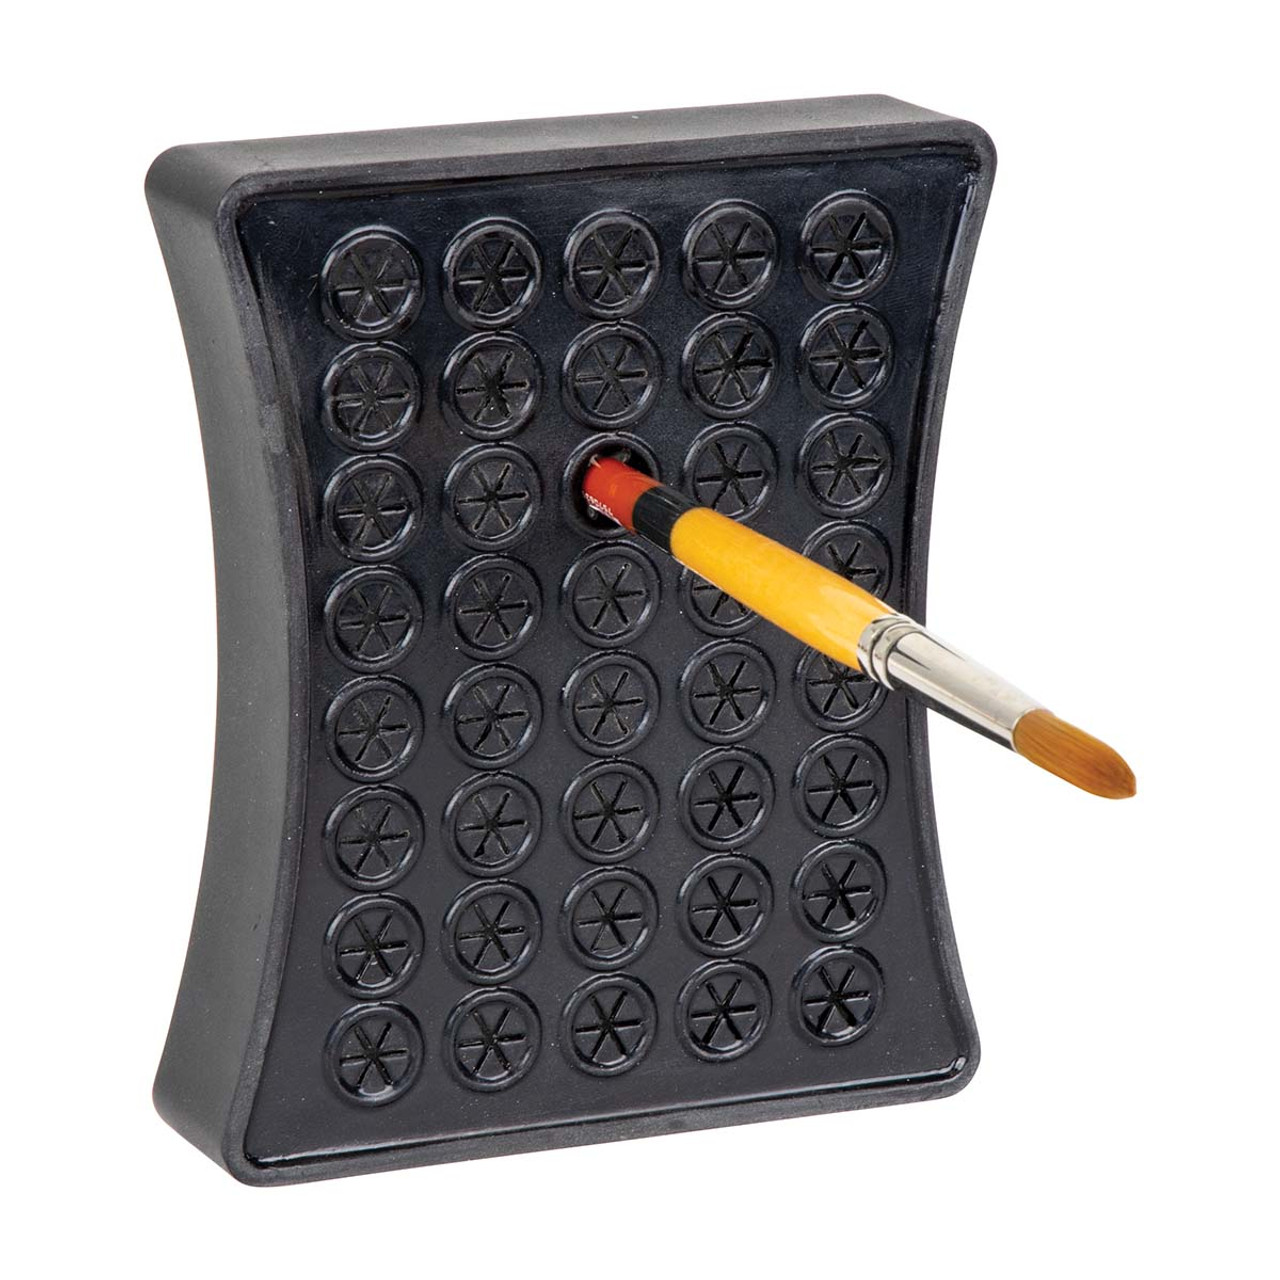 Brush Washer with Drying Rack by Artist's Loft™